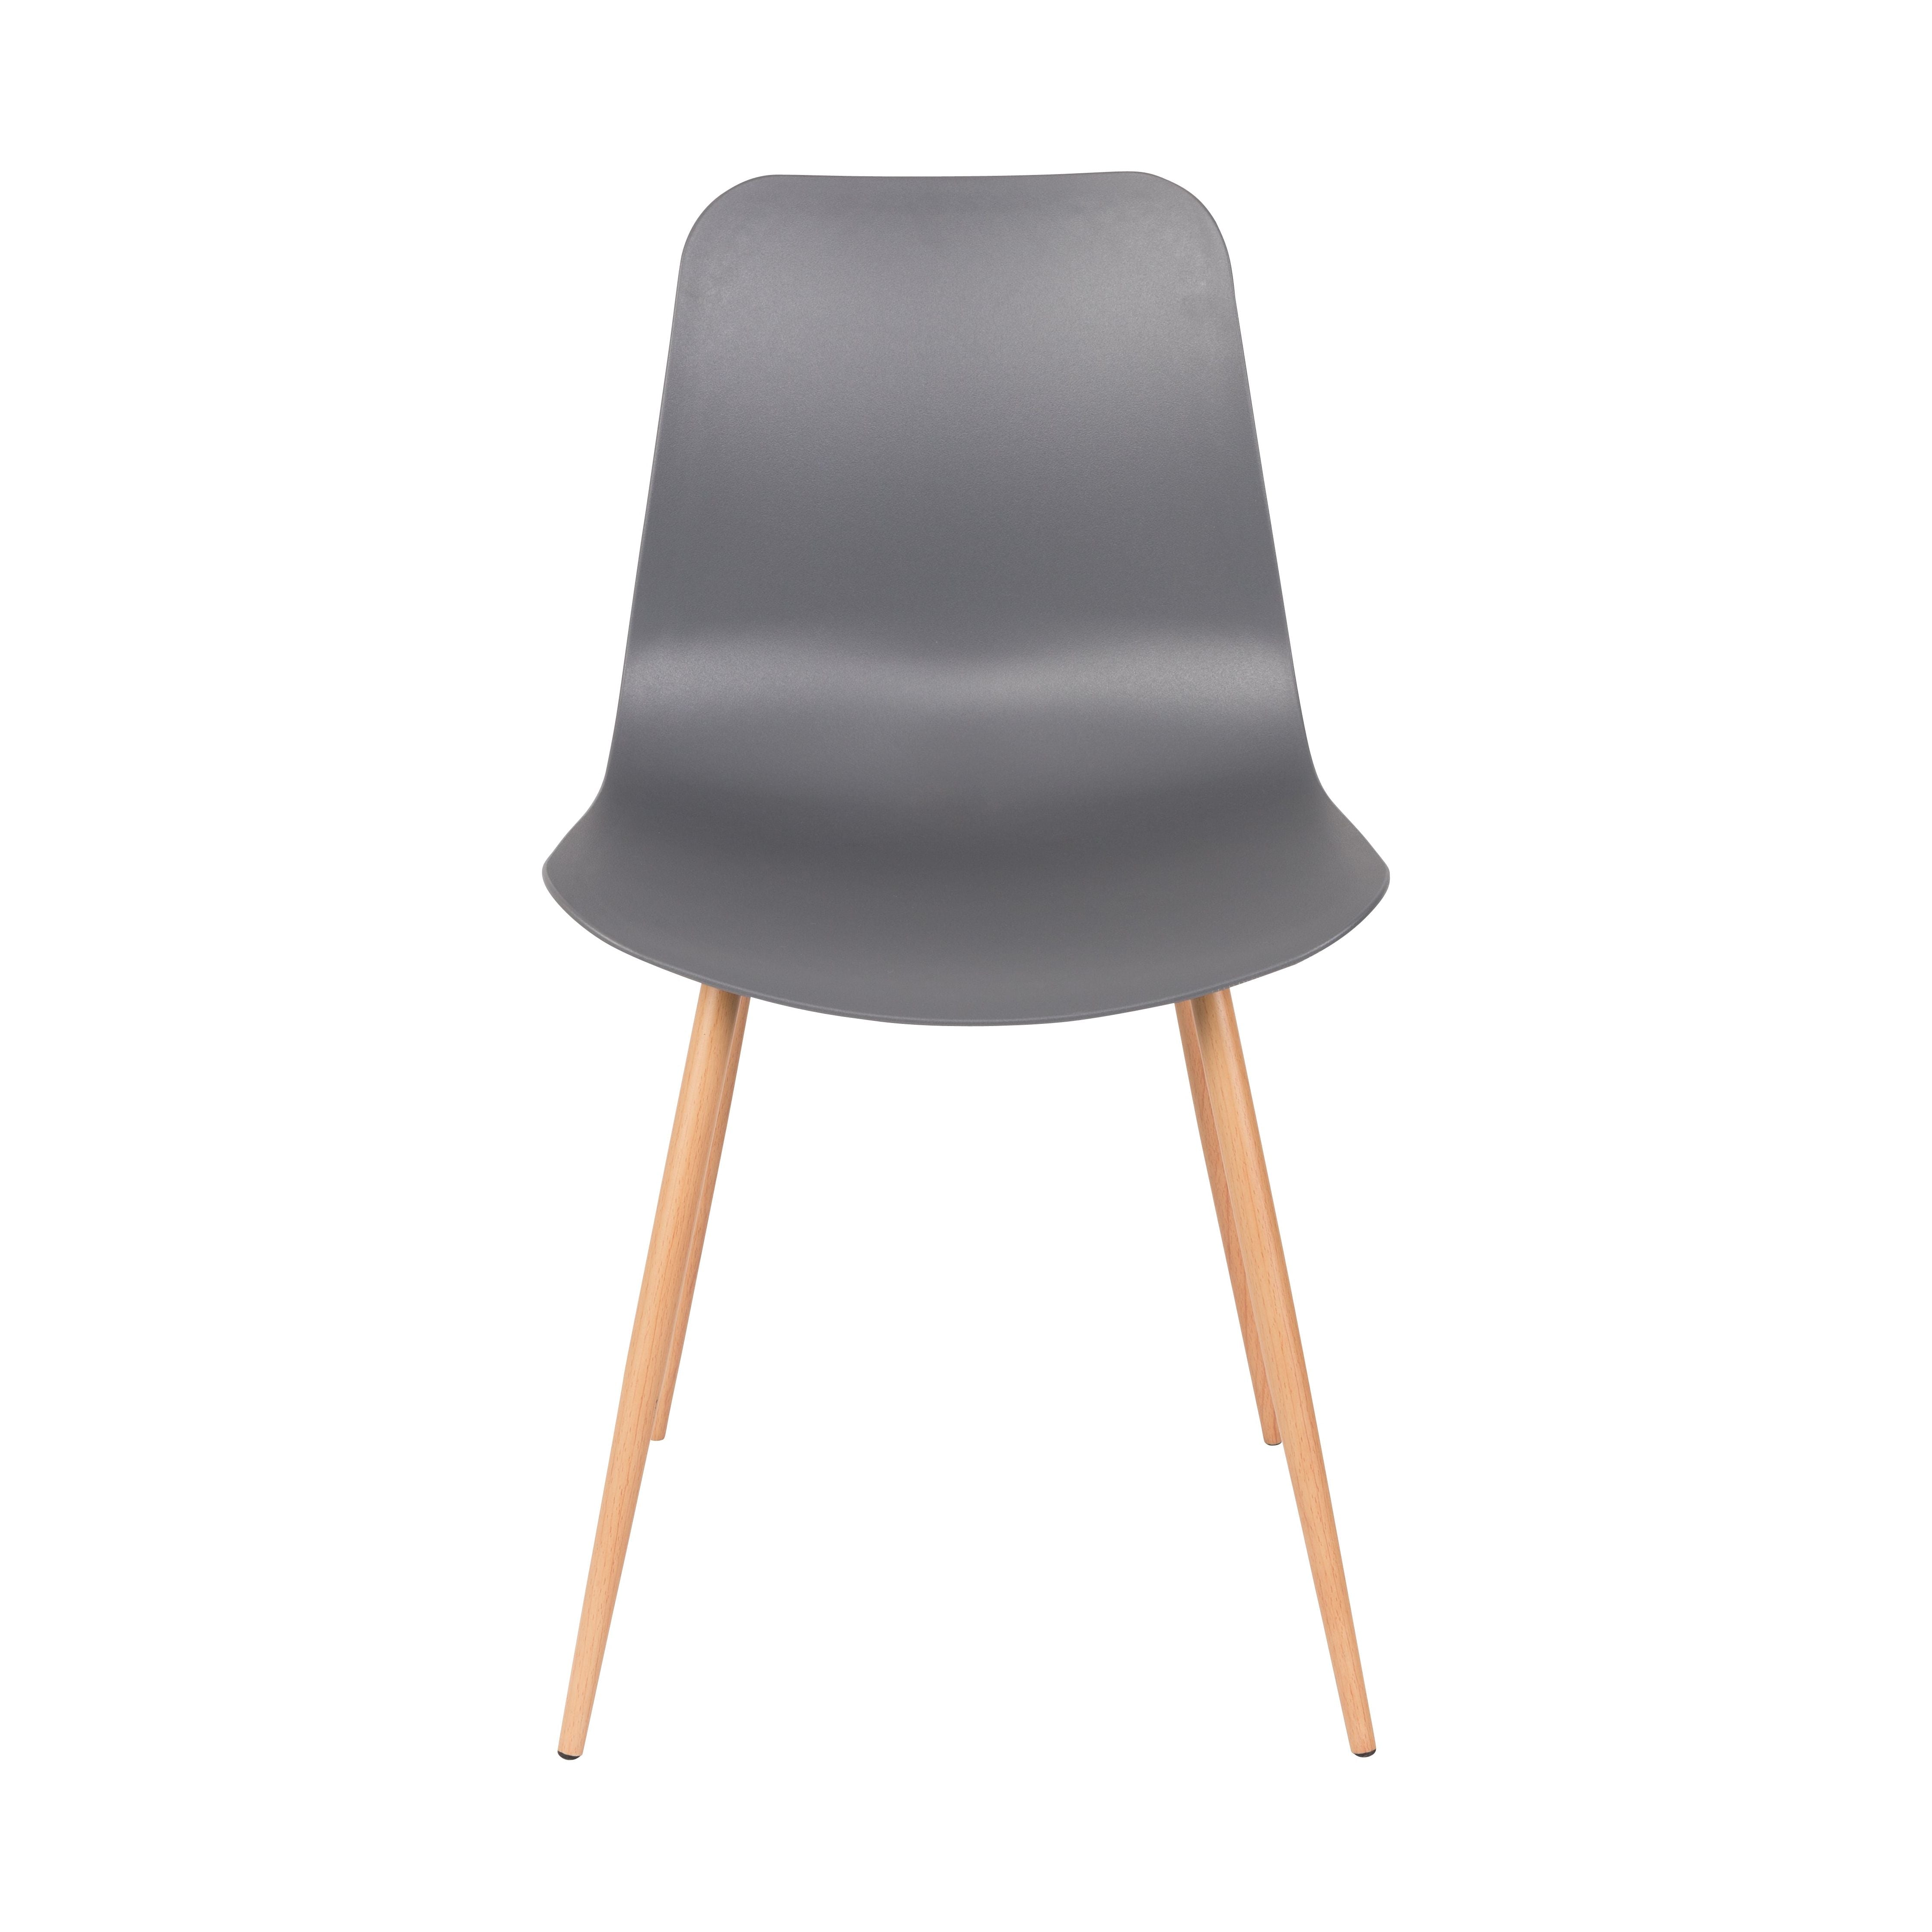 Chair leon gray | 2 pieces